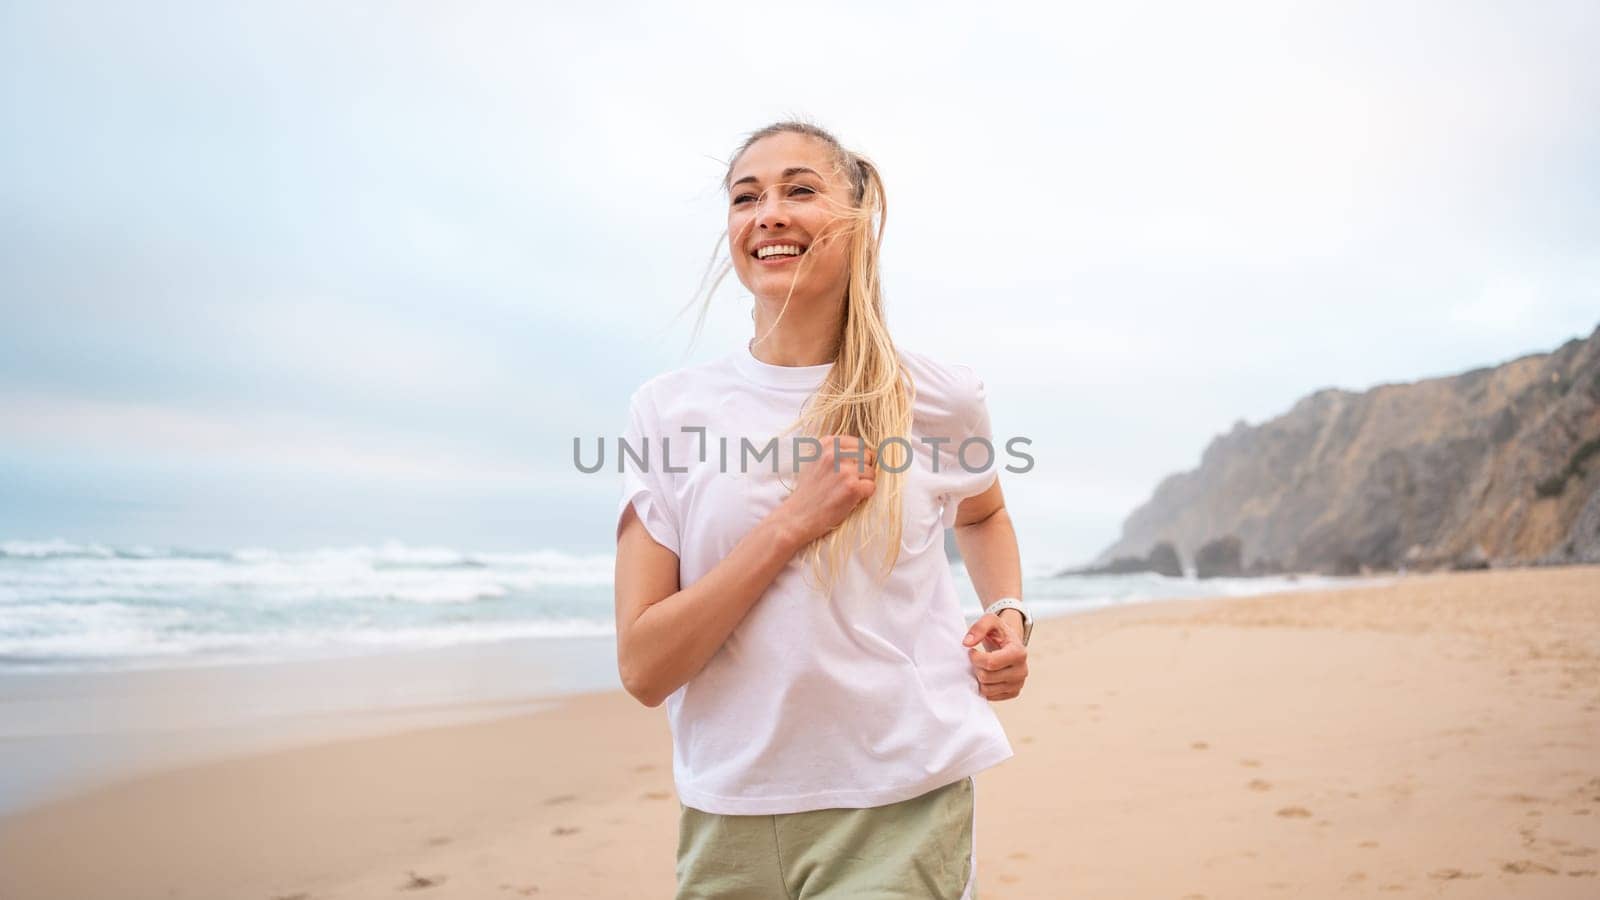 Smiling young woman runner jogging on sandy beach near sea by andreonegin